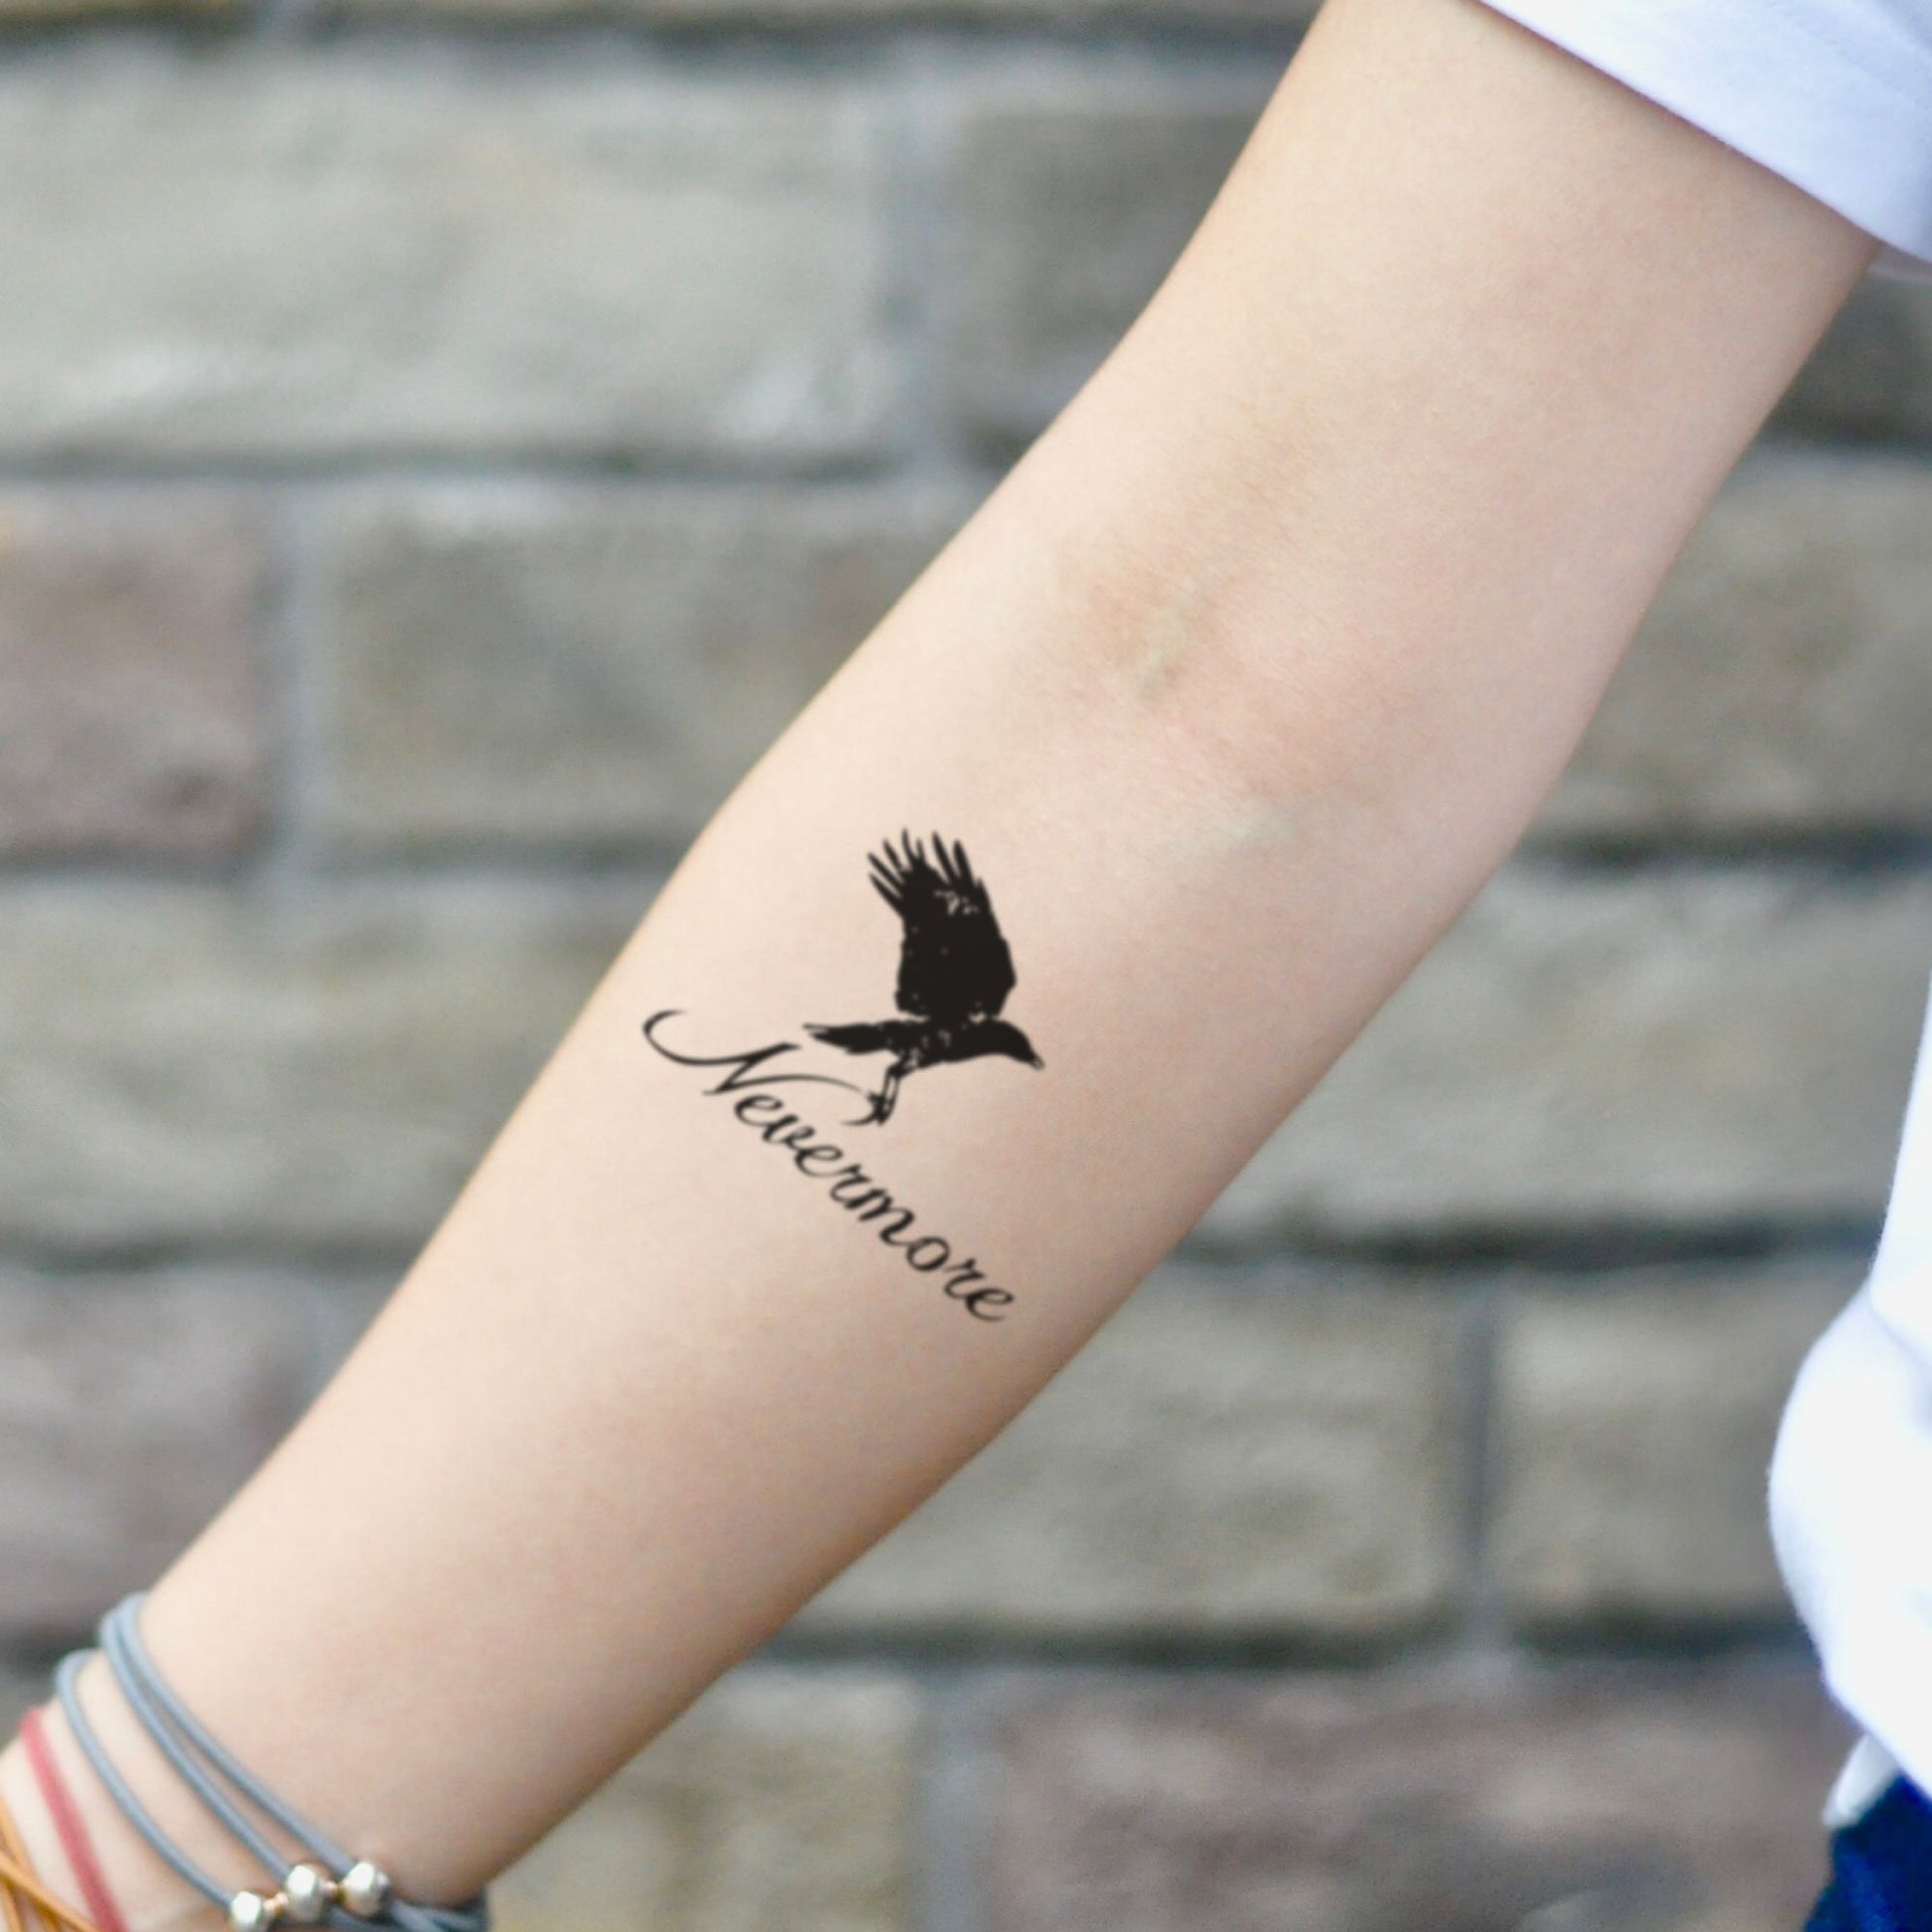 fake small nevermore quoth the raven lettering temporary tattoo sticker design idea on inner arm